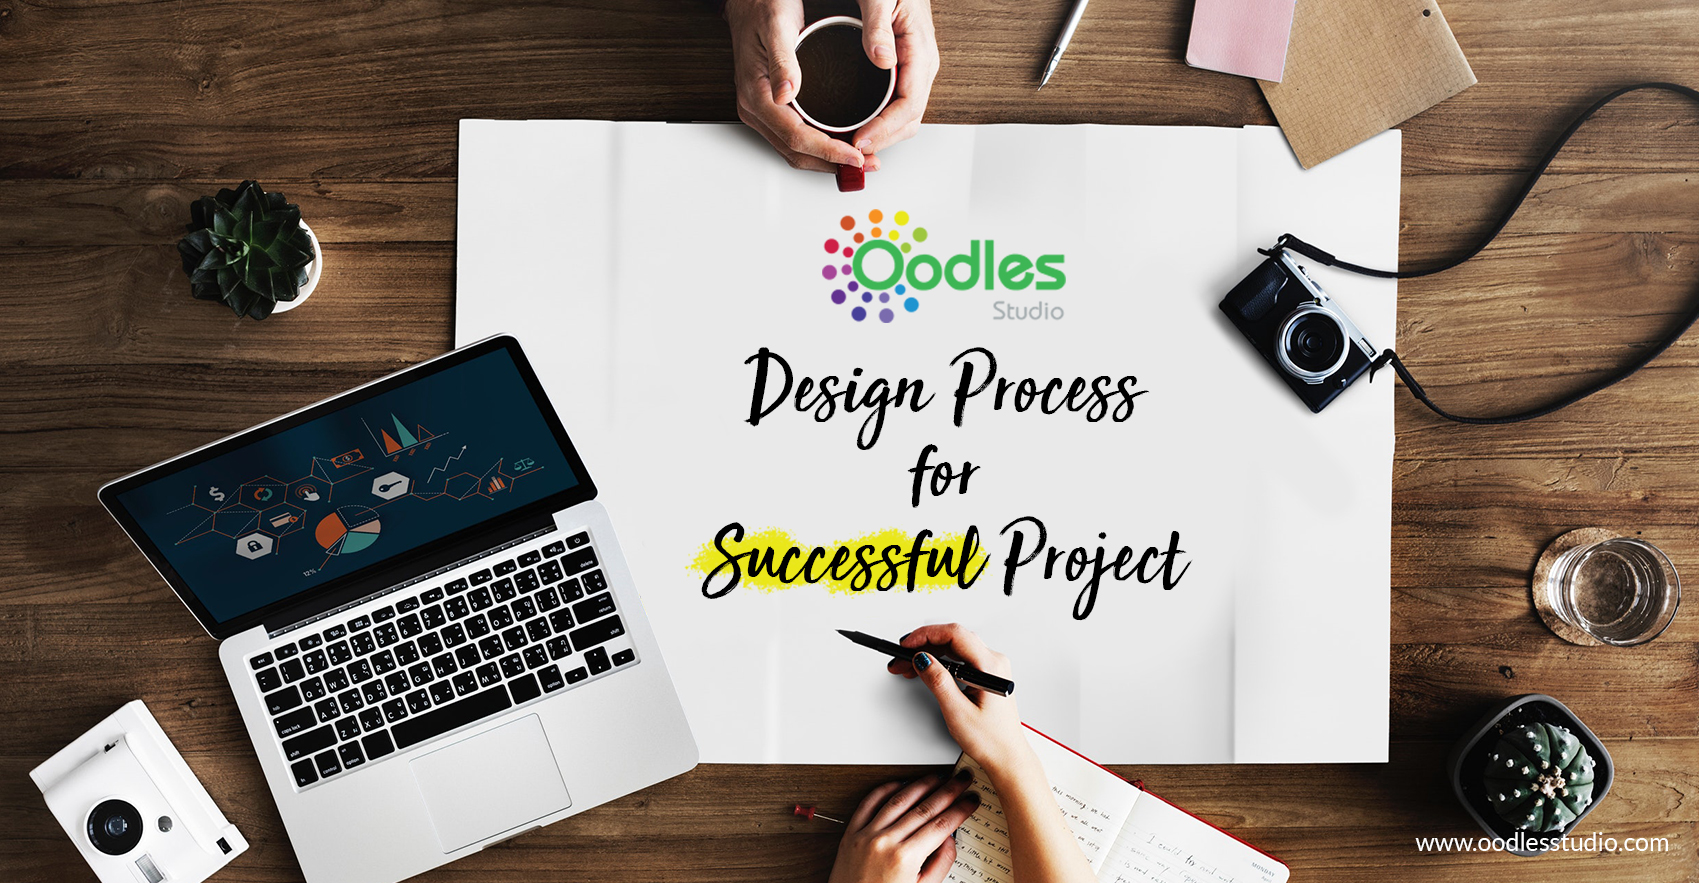 Design Process for successful Project